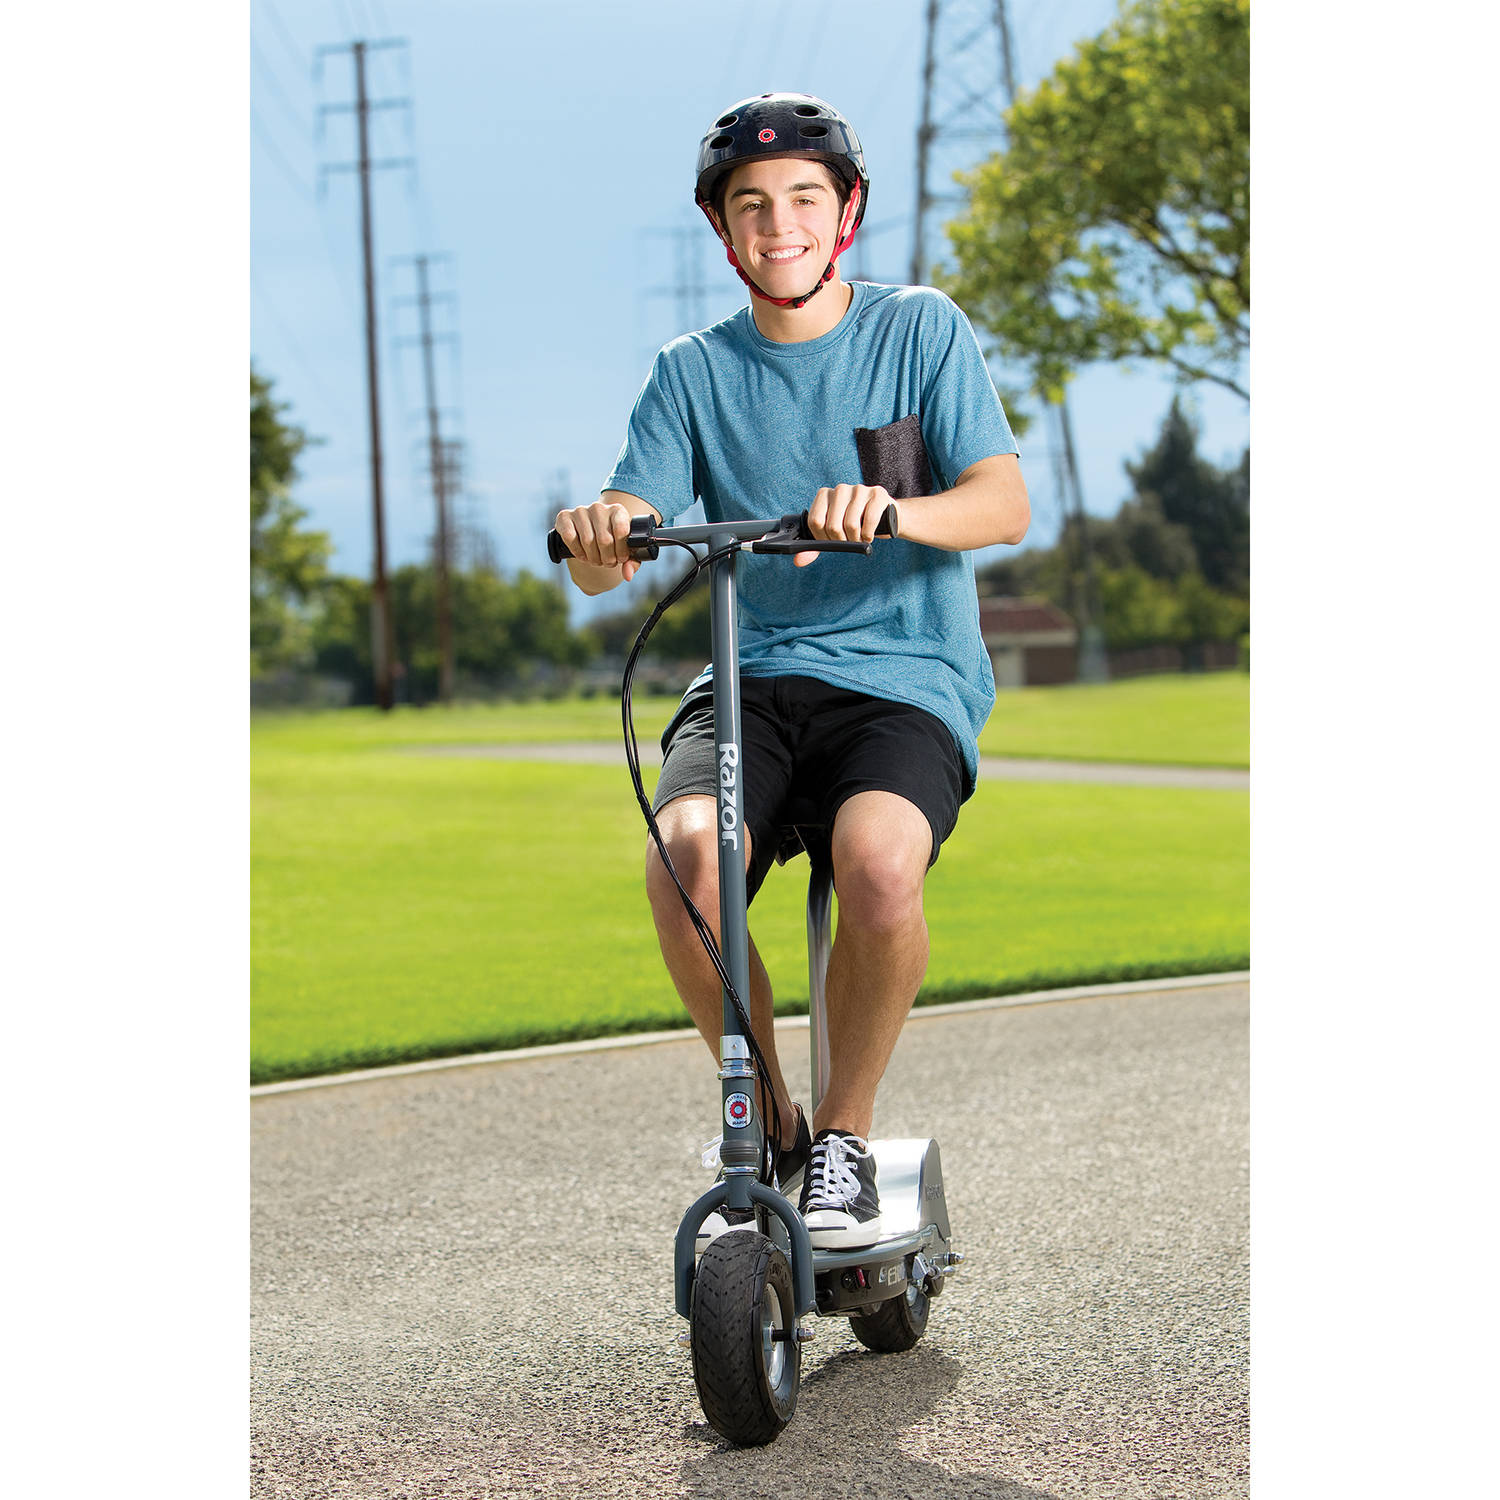 Razor E300S Seated Electric Scooter - Gray, for Ages 13+ and up to 220 lbs, 9" Pneumatic Front Tire, Up to 15 mph & up to 10-mile Range, 250W Chain Motor, 24V Sealed Lead-Acid Battery - image 4 of 12